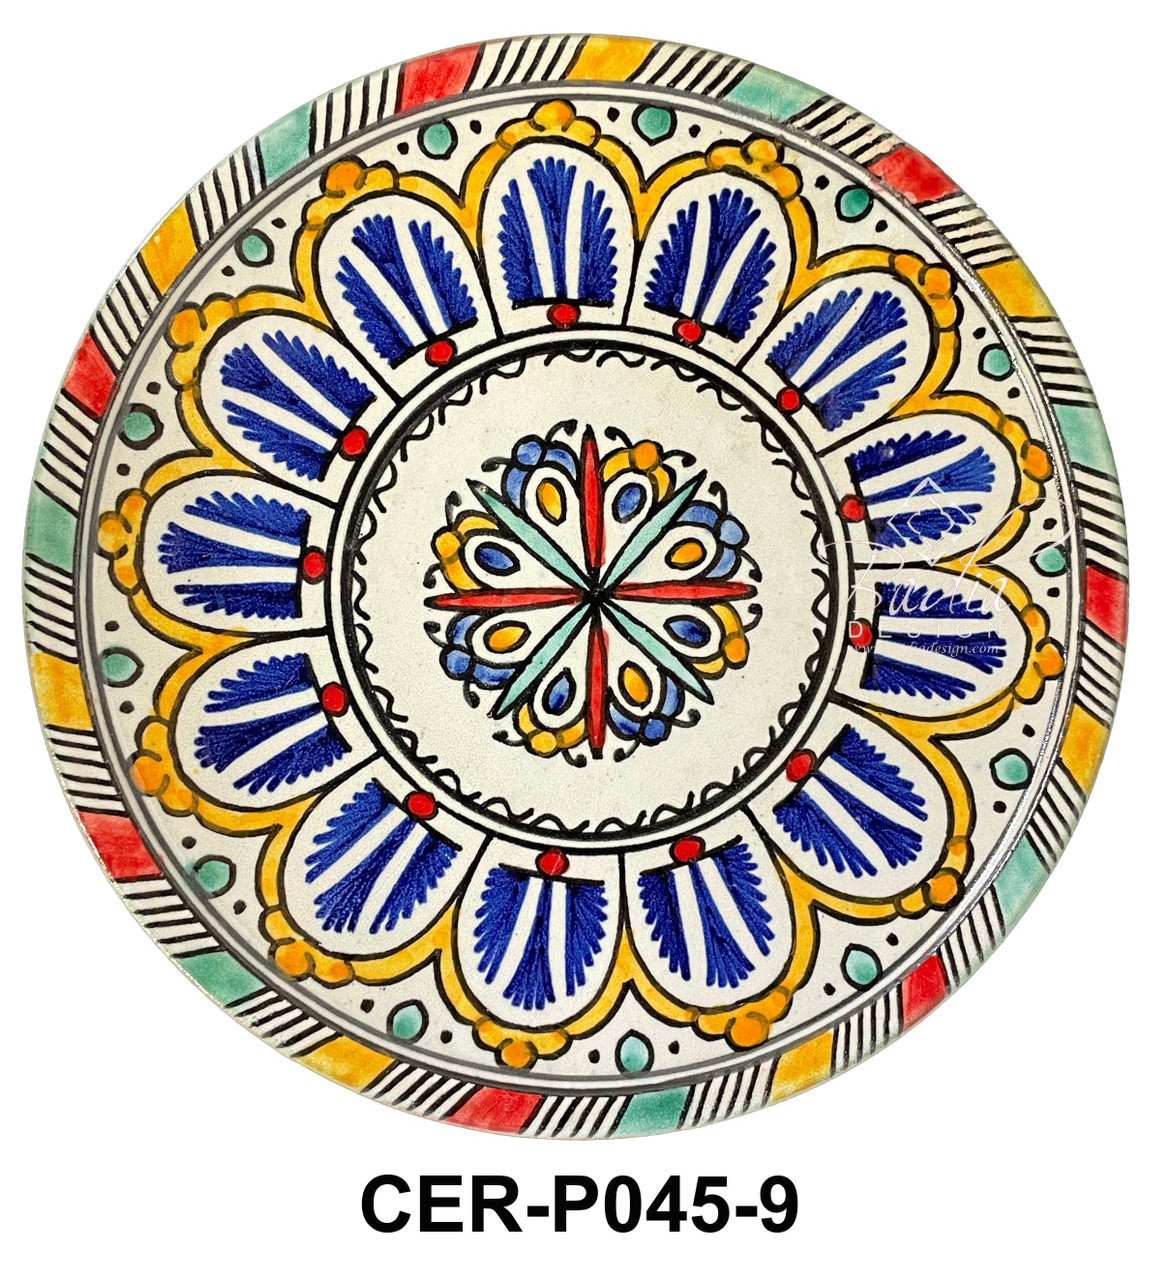 9 Inch Wide Hand Painted Multi-Color Ceramic Plates - CER-P045